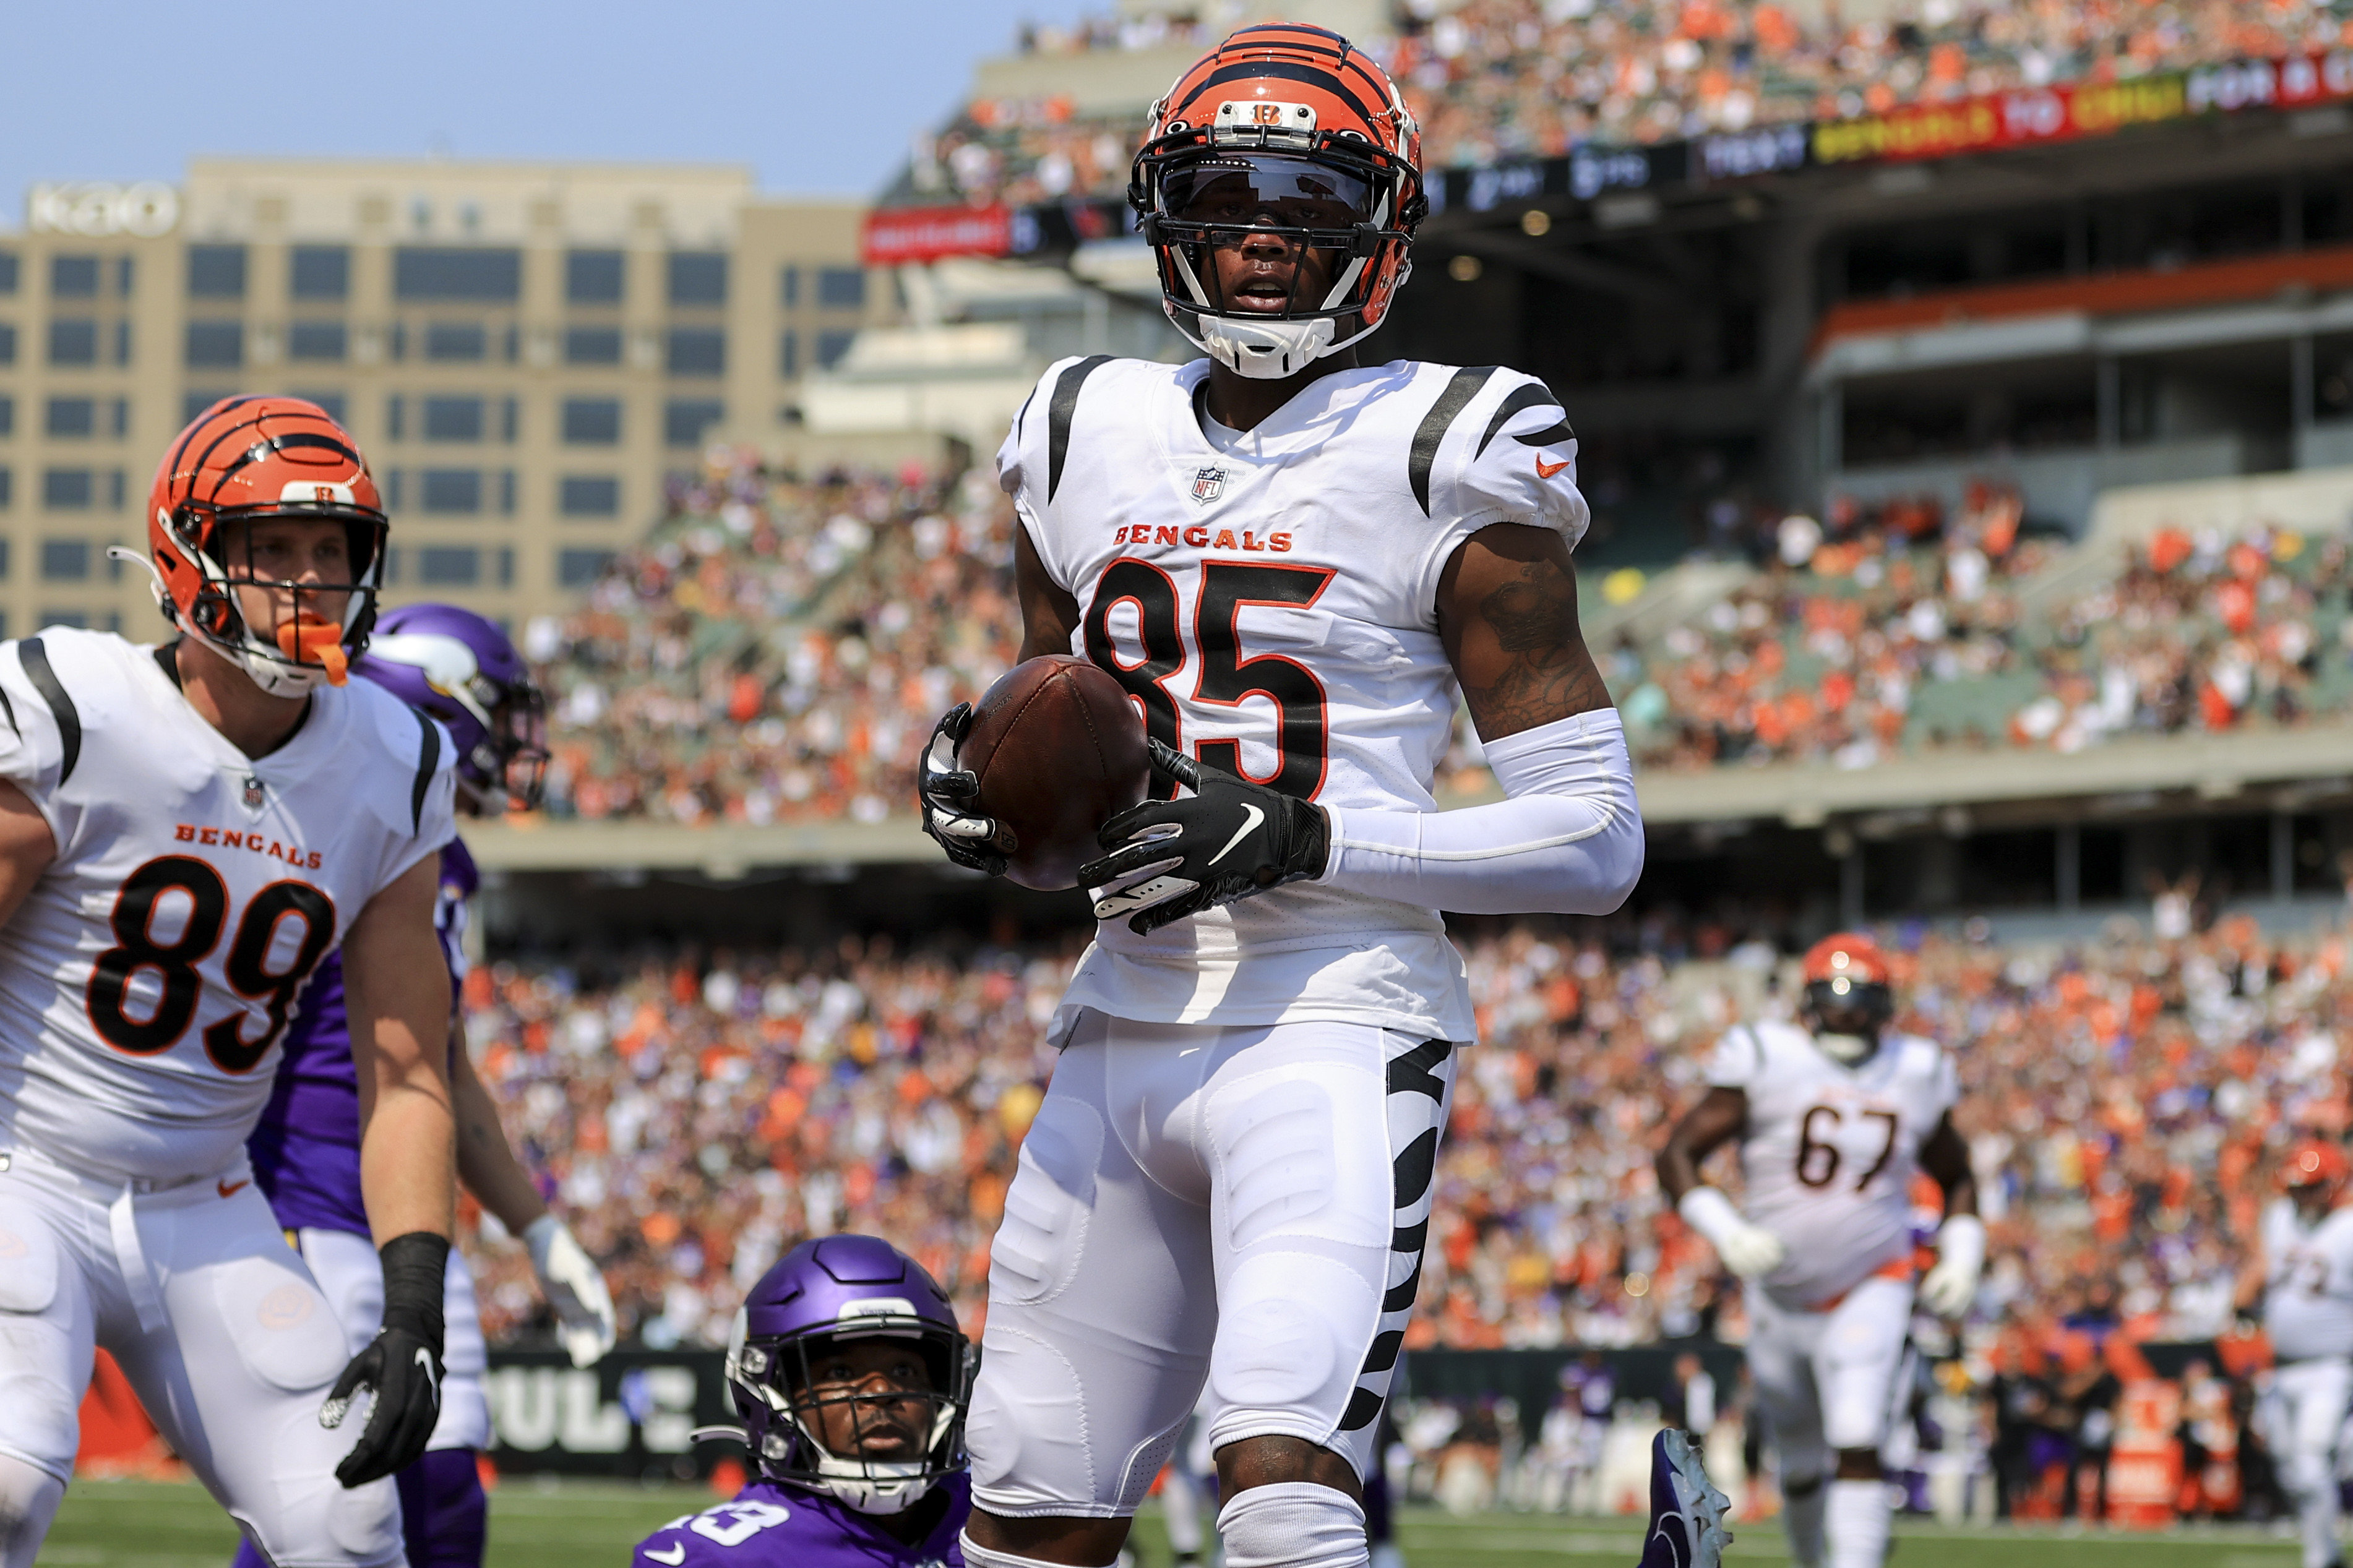 Tee Higgins to Change Bengals' Jersey Number to 5 from Chad